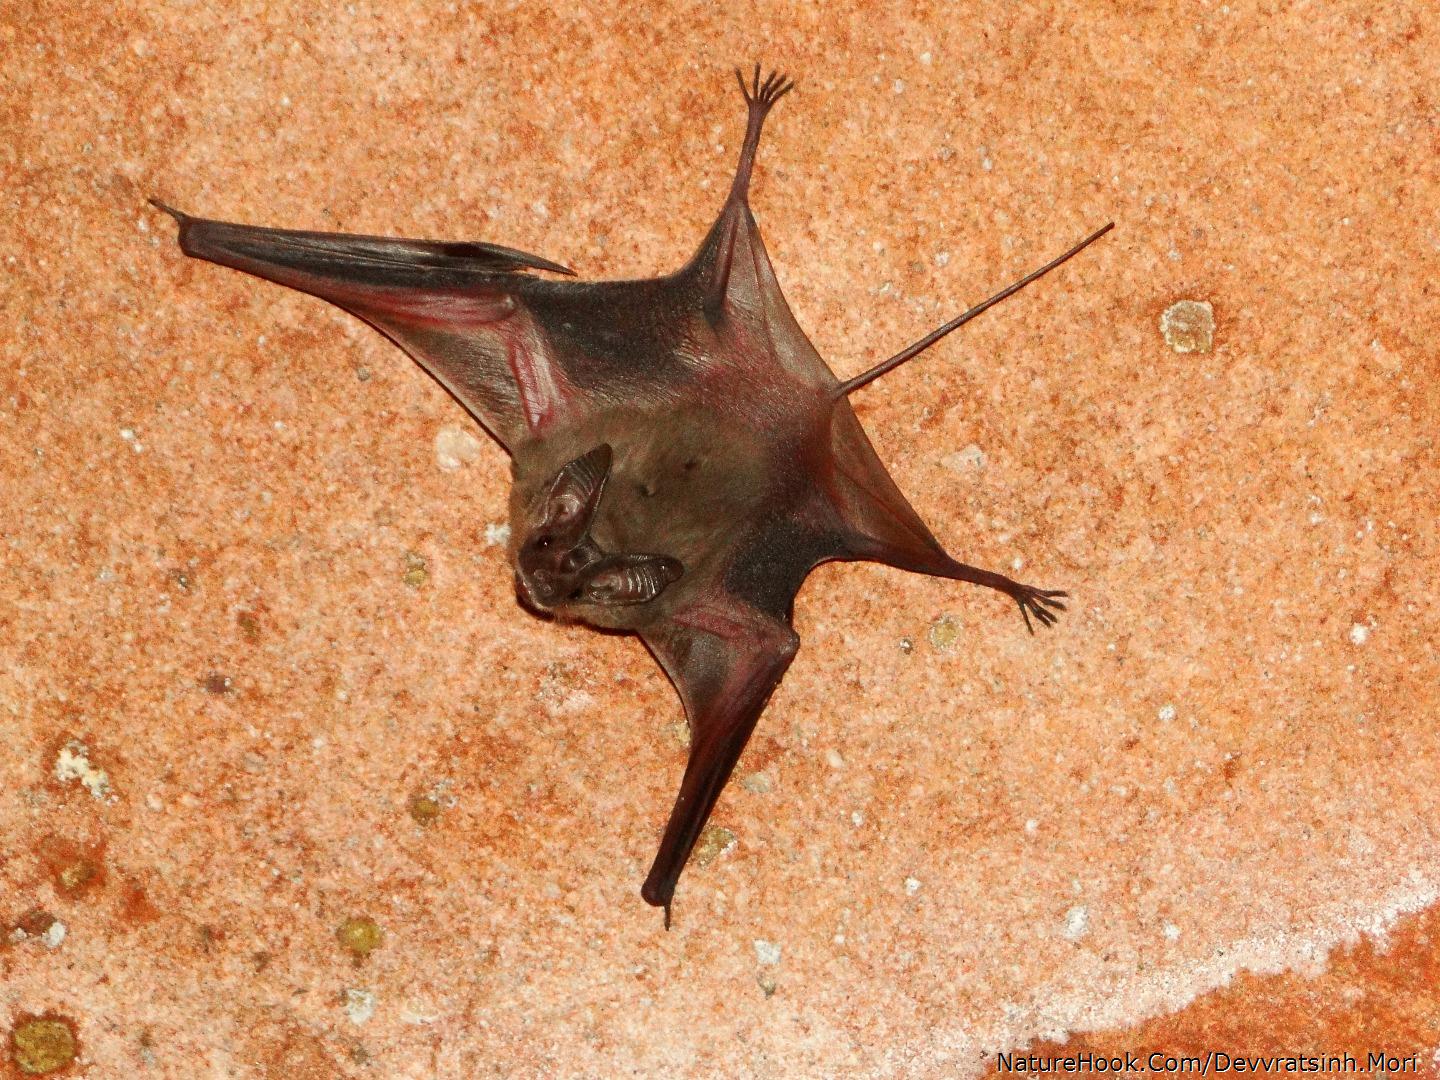 Lesser mouse tailed bat